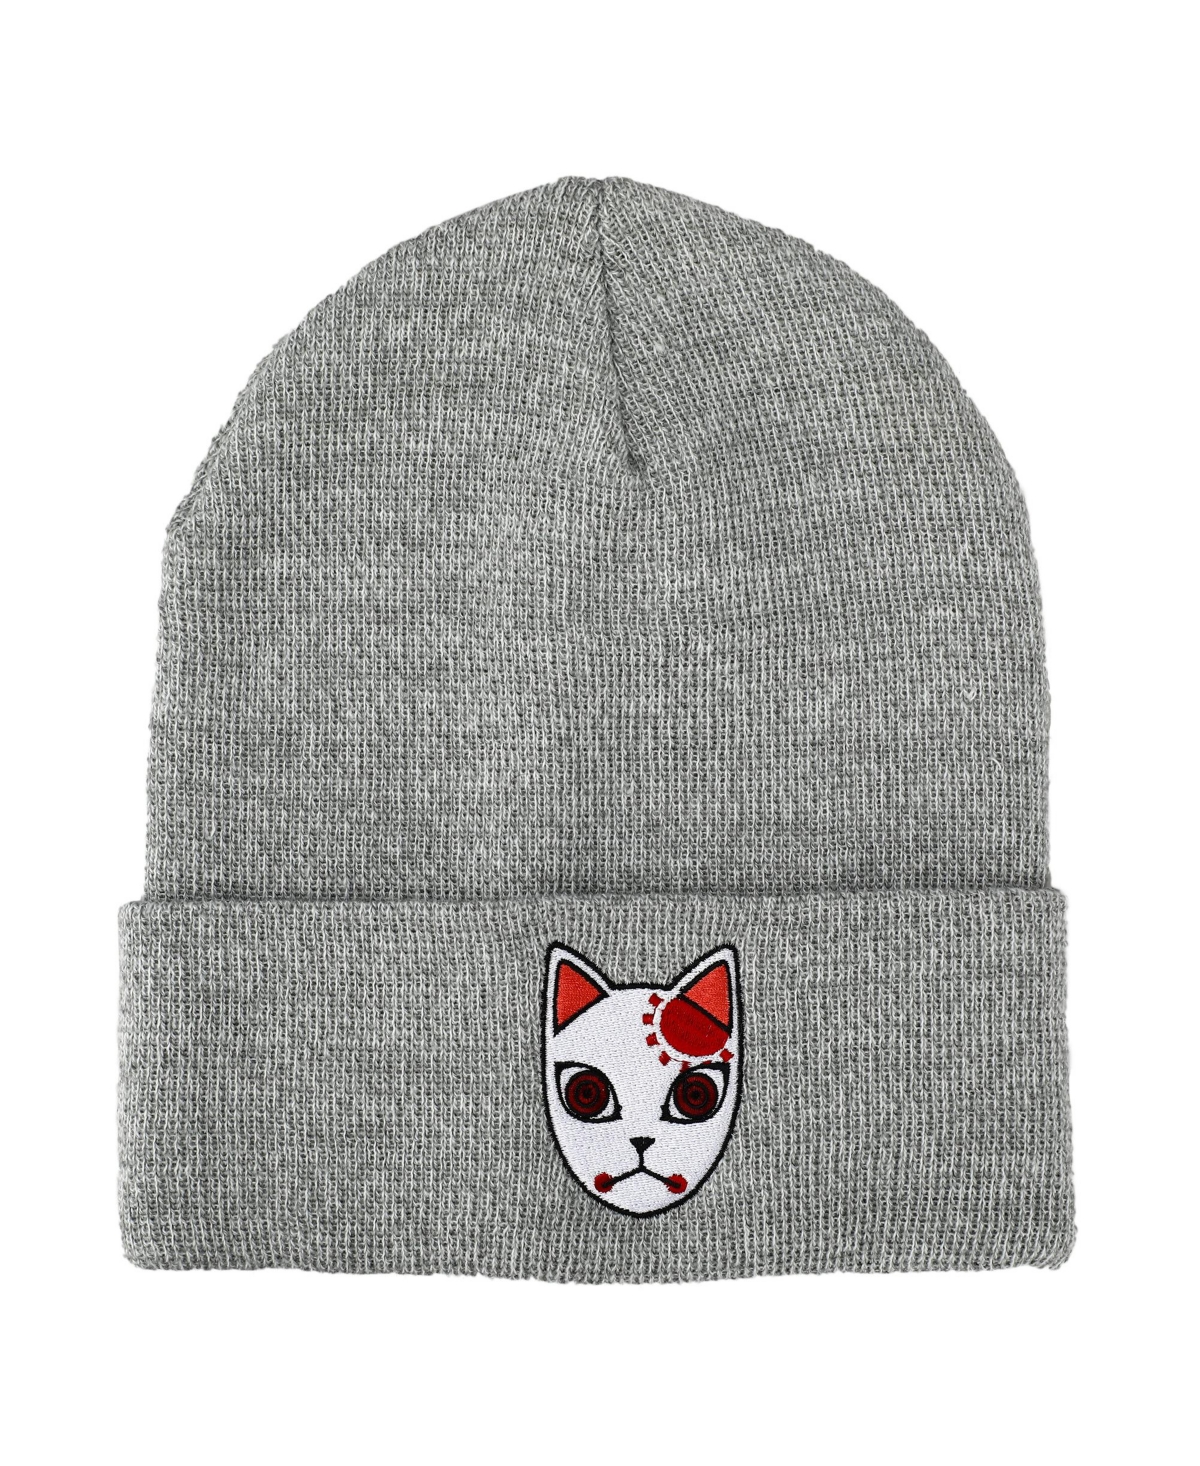 Men's Tanjiro Fox Mask Athletic Heather Skull Knitted Embroidered Cuffed Winter Beanie - Gray